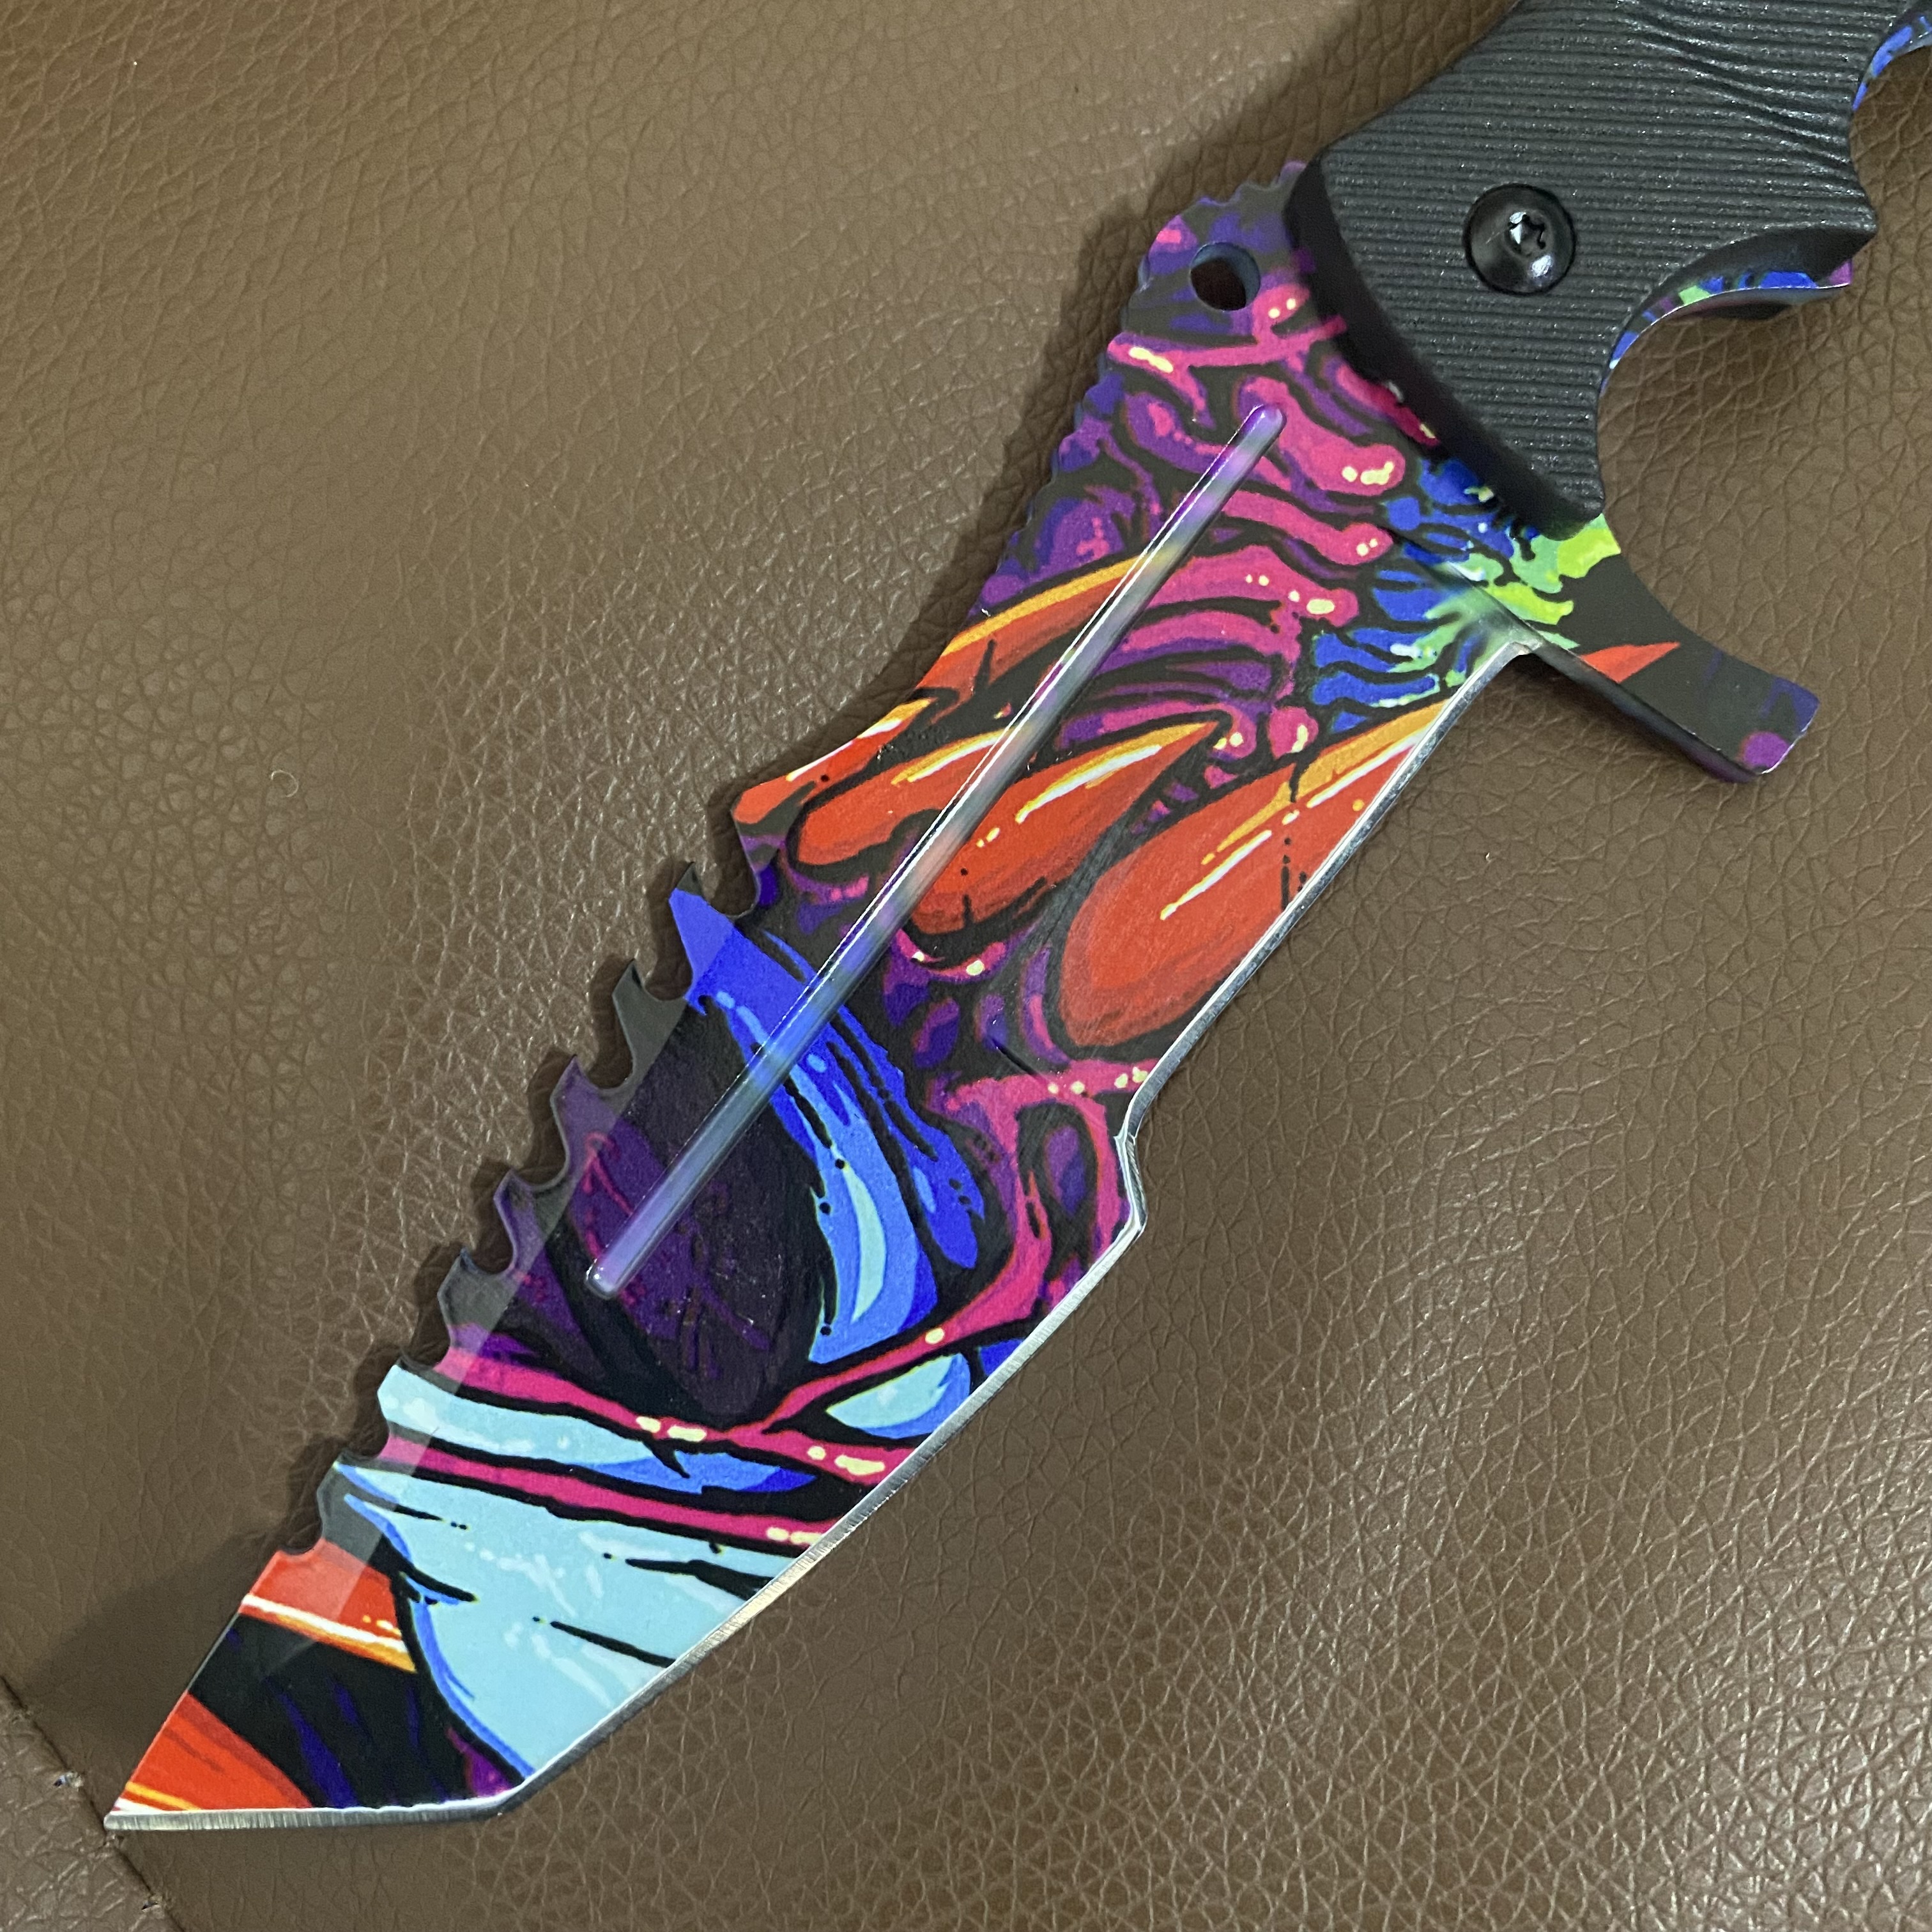 

real Counter Strike Hyper beast csgo huntsman knife Hunting Camping knifes Survival Tactical knifess Outdoor knives Fixed Blade fishing knife hiking garden tools